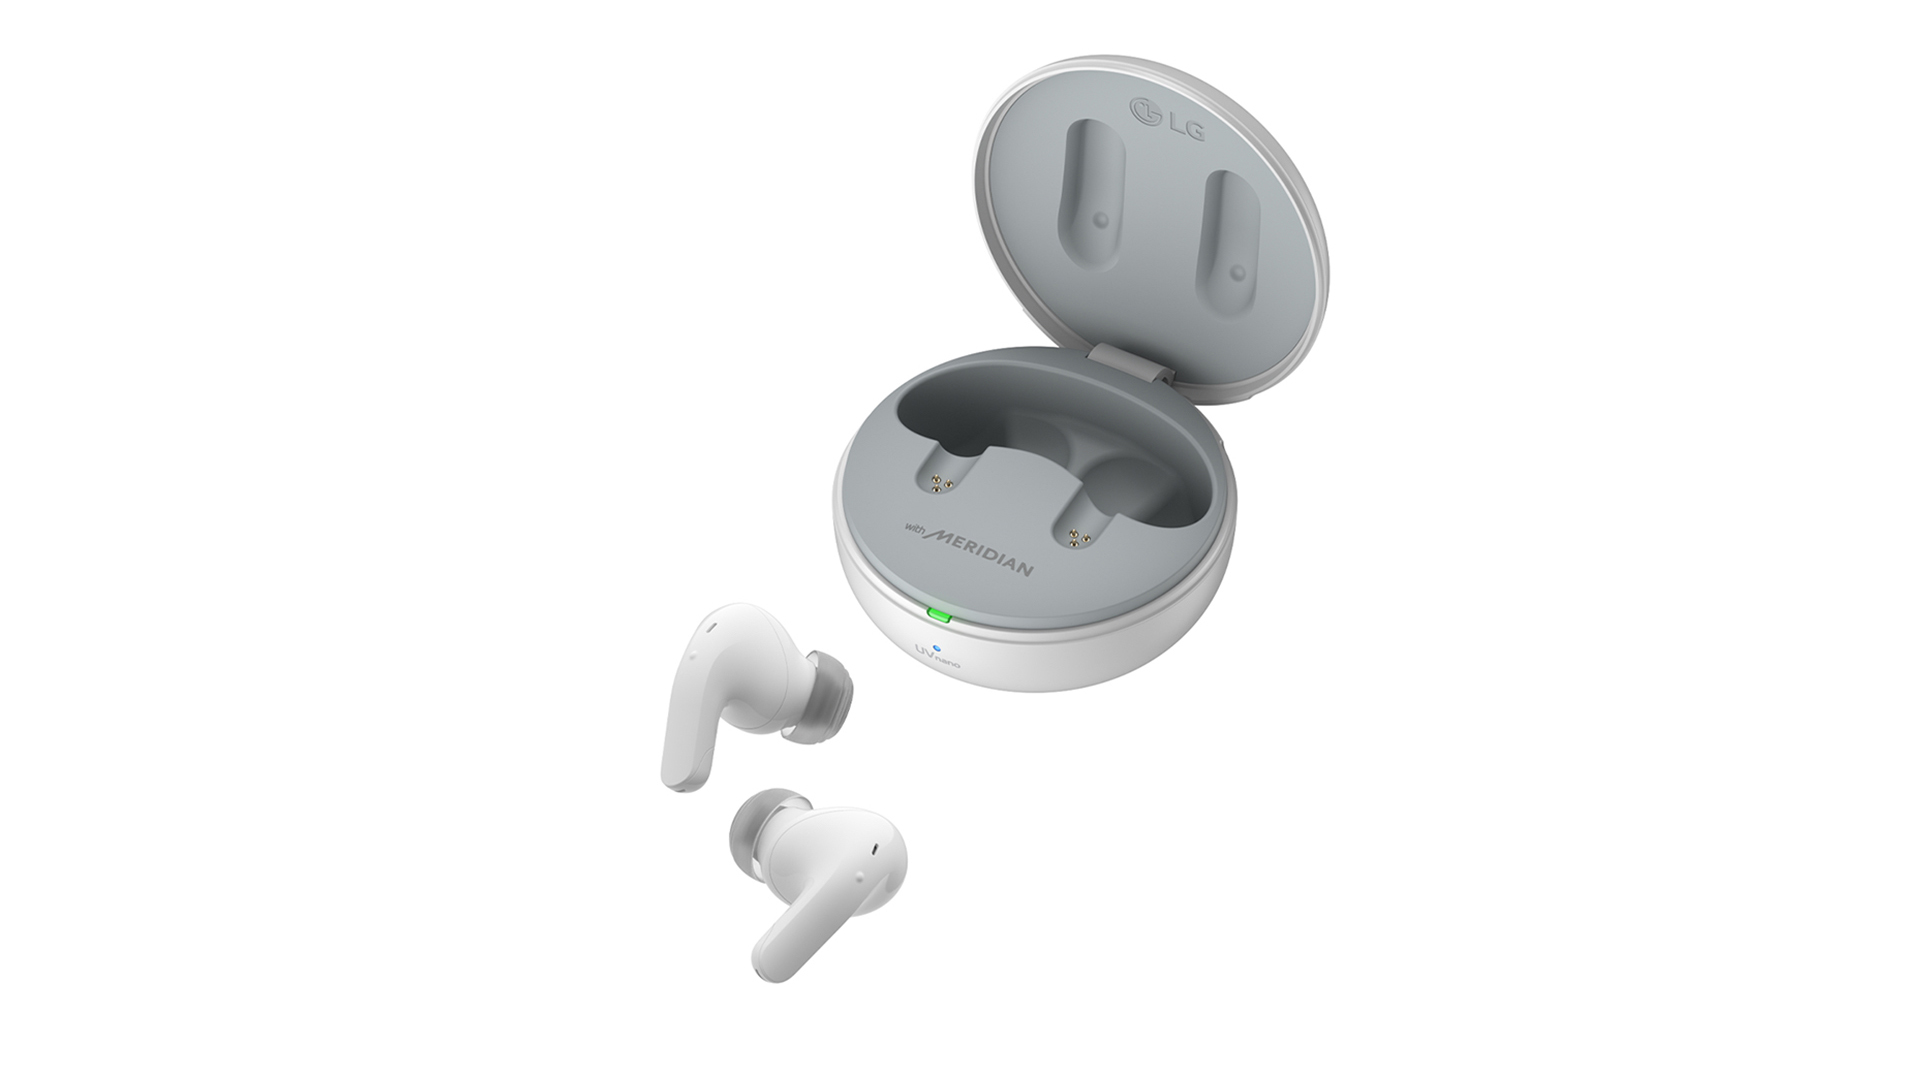 LG TONE Free T90 wireless earbuds are great gifts for the dads and grads in your life